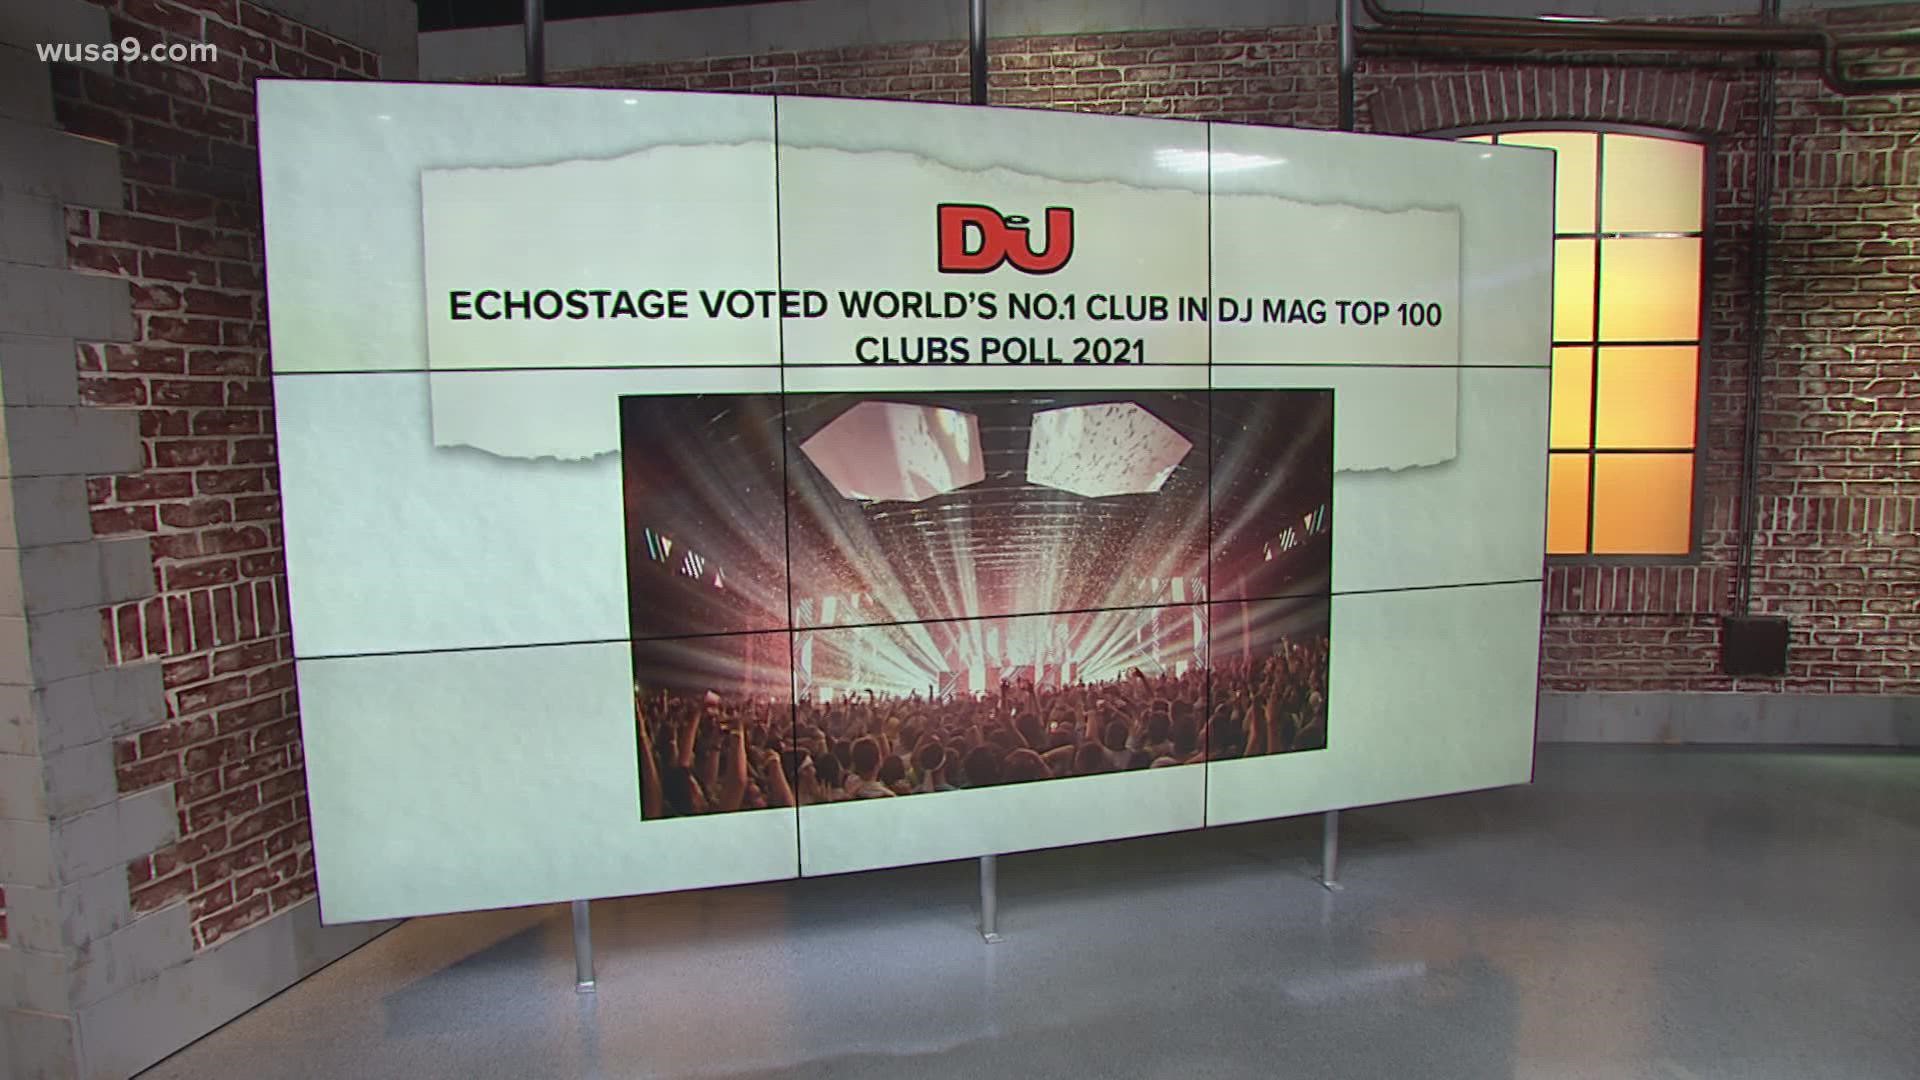 DJ Mag's new poll ranks the DC's club as the world's best.